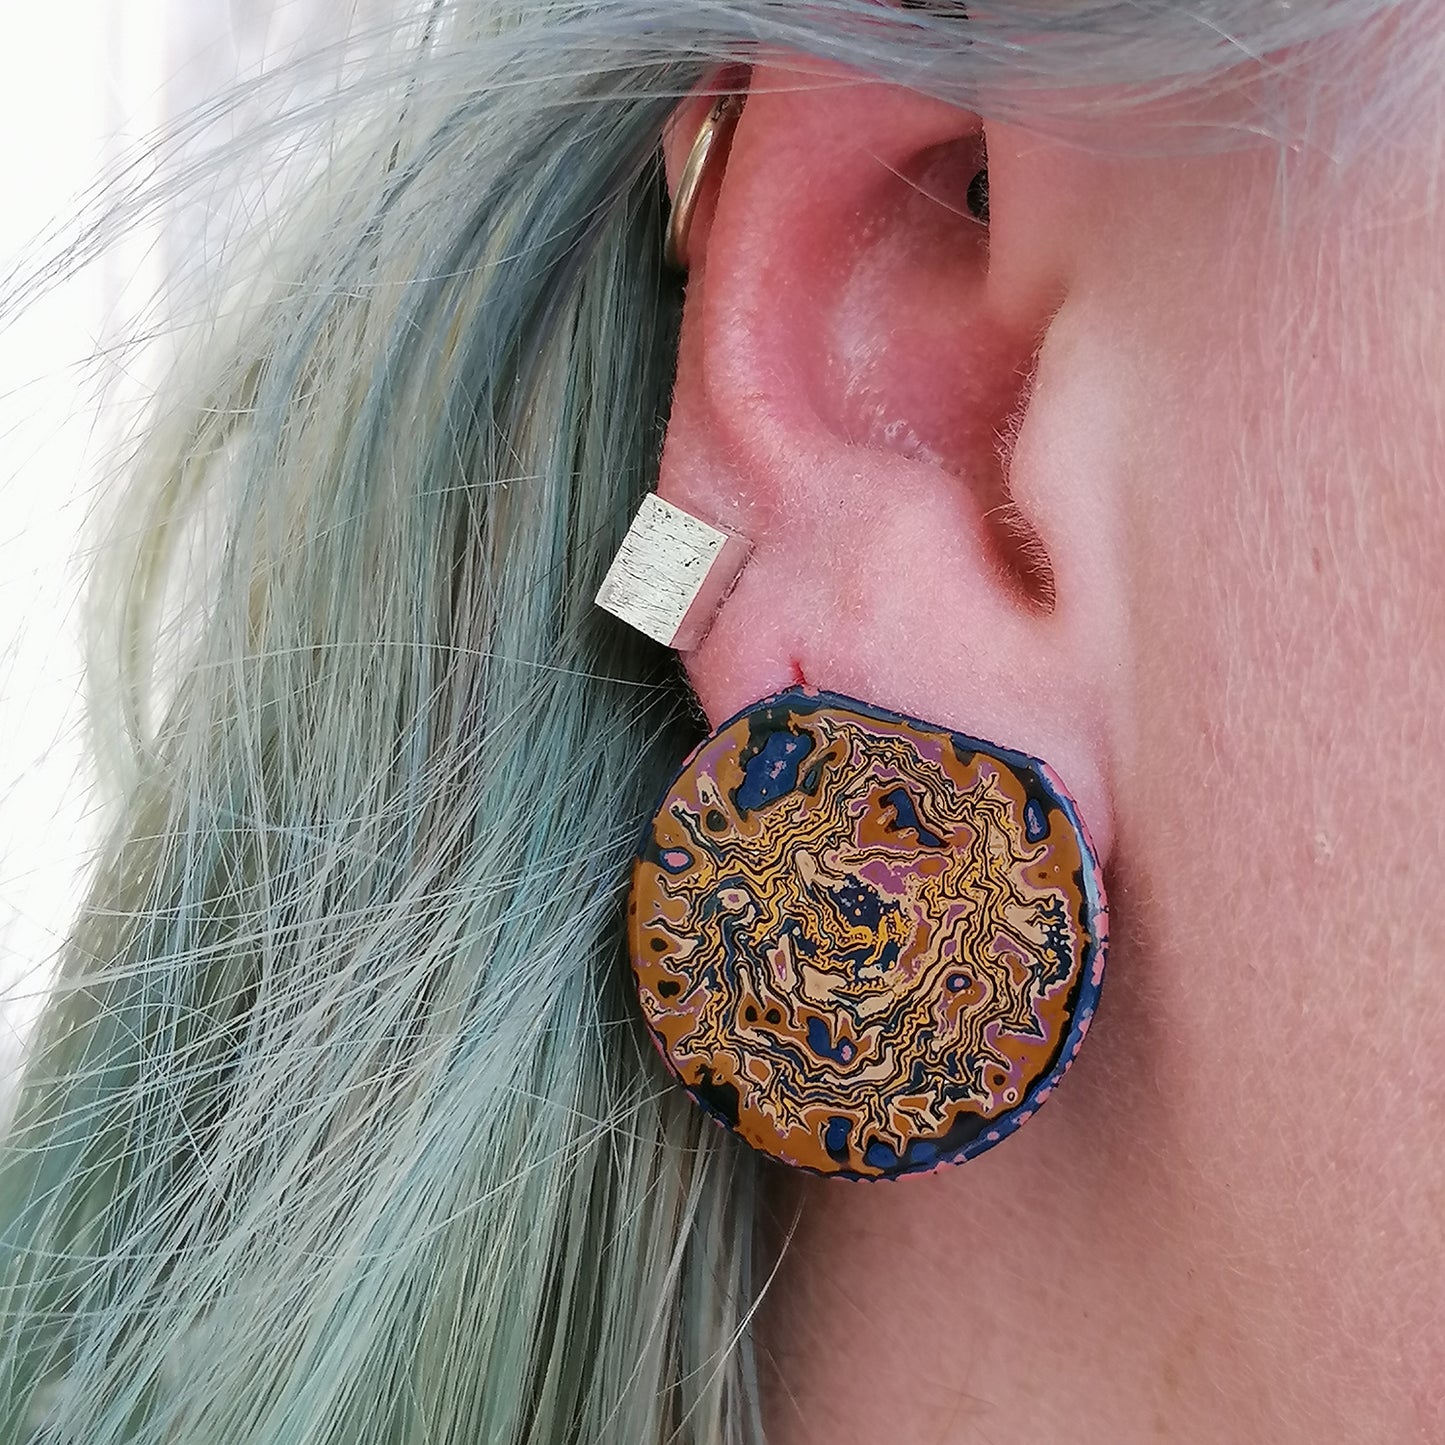 image shows a single round stud earring with the top portion cut off. Earring shows a wrinkled pattern with yellow deep blue and beige. The earring is being worn by a blue haired model.